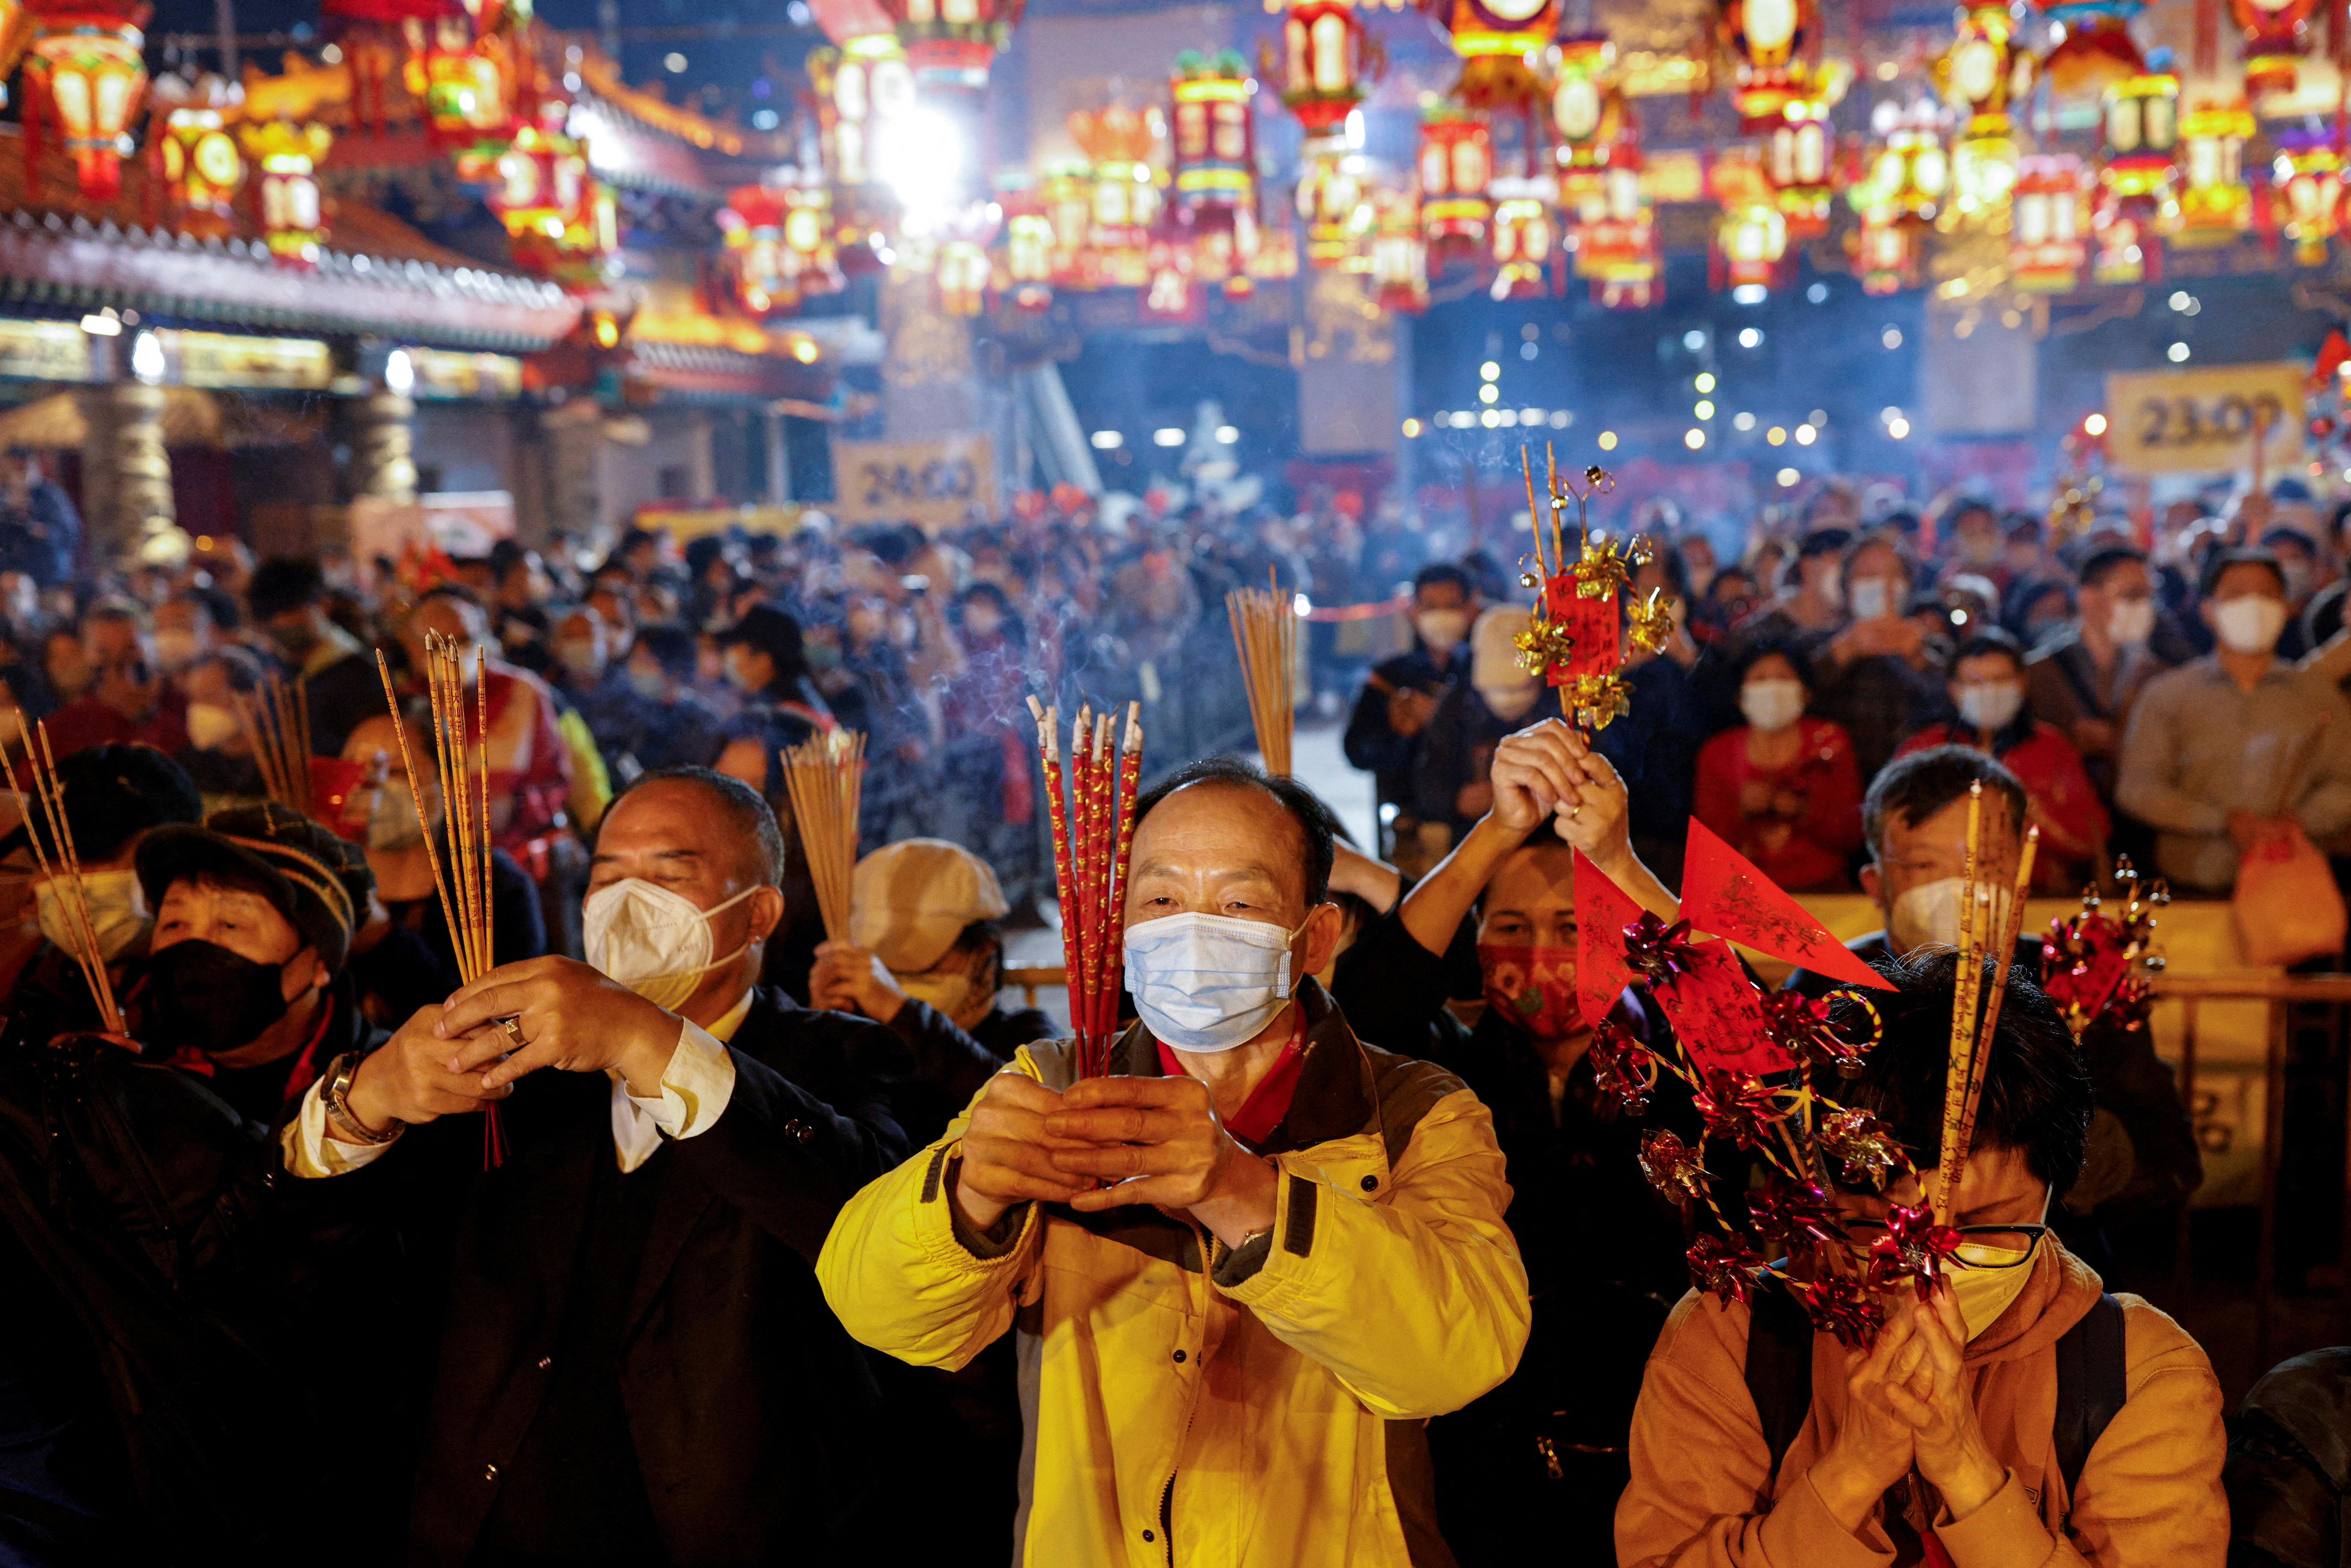 Worshipers make offerings inside Wong Tai Sin Temple to celebrate Chinese New Year in Hong Kong